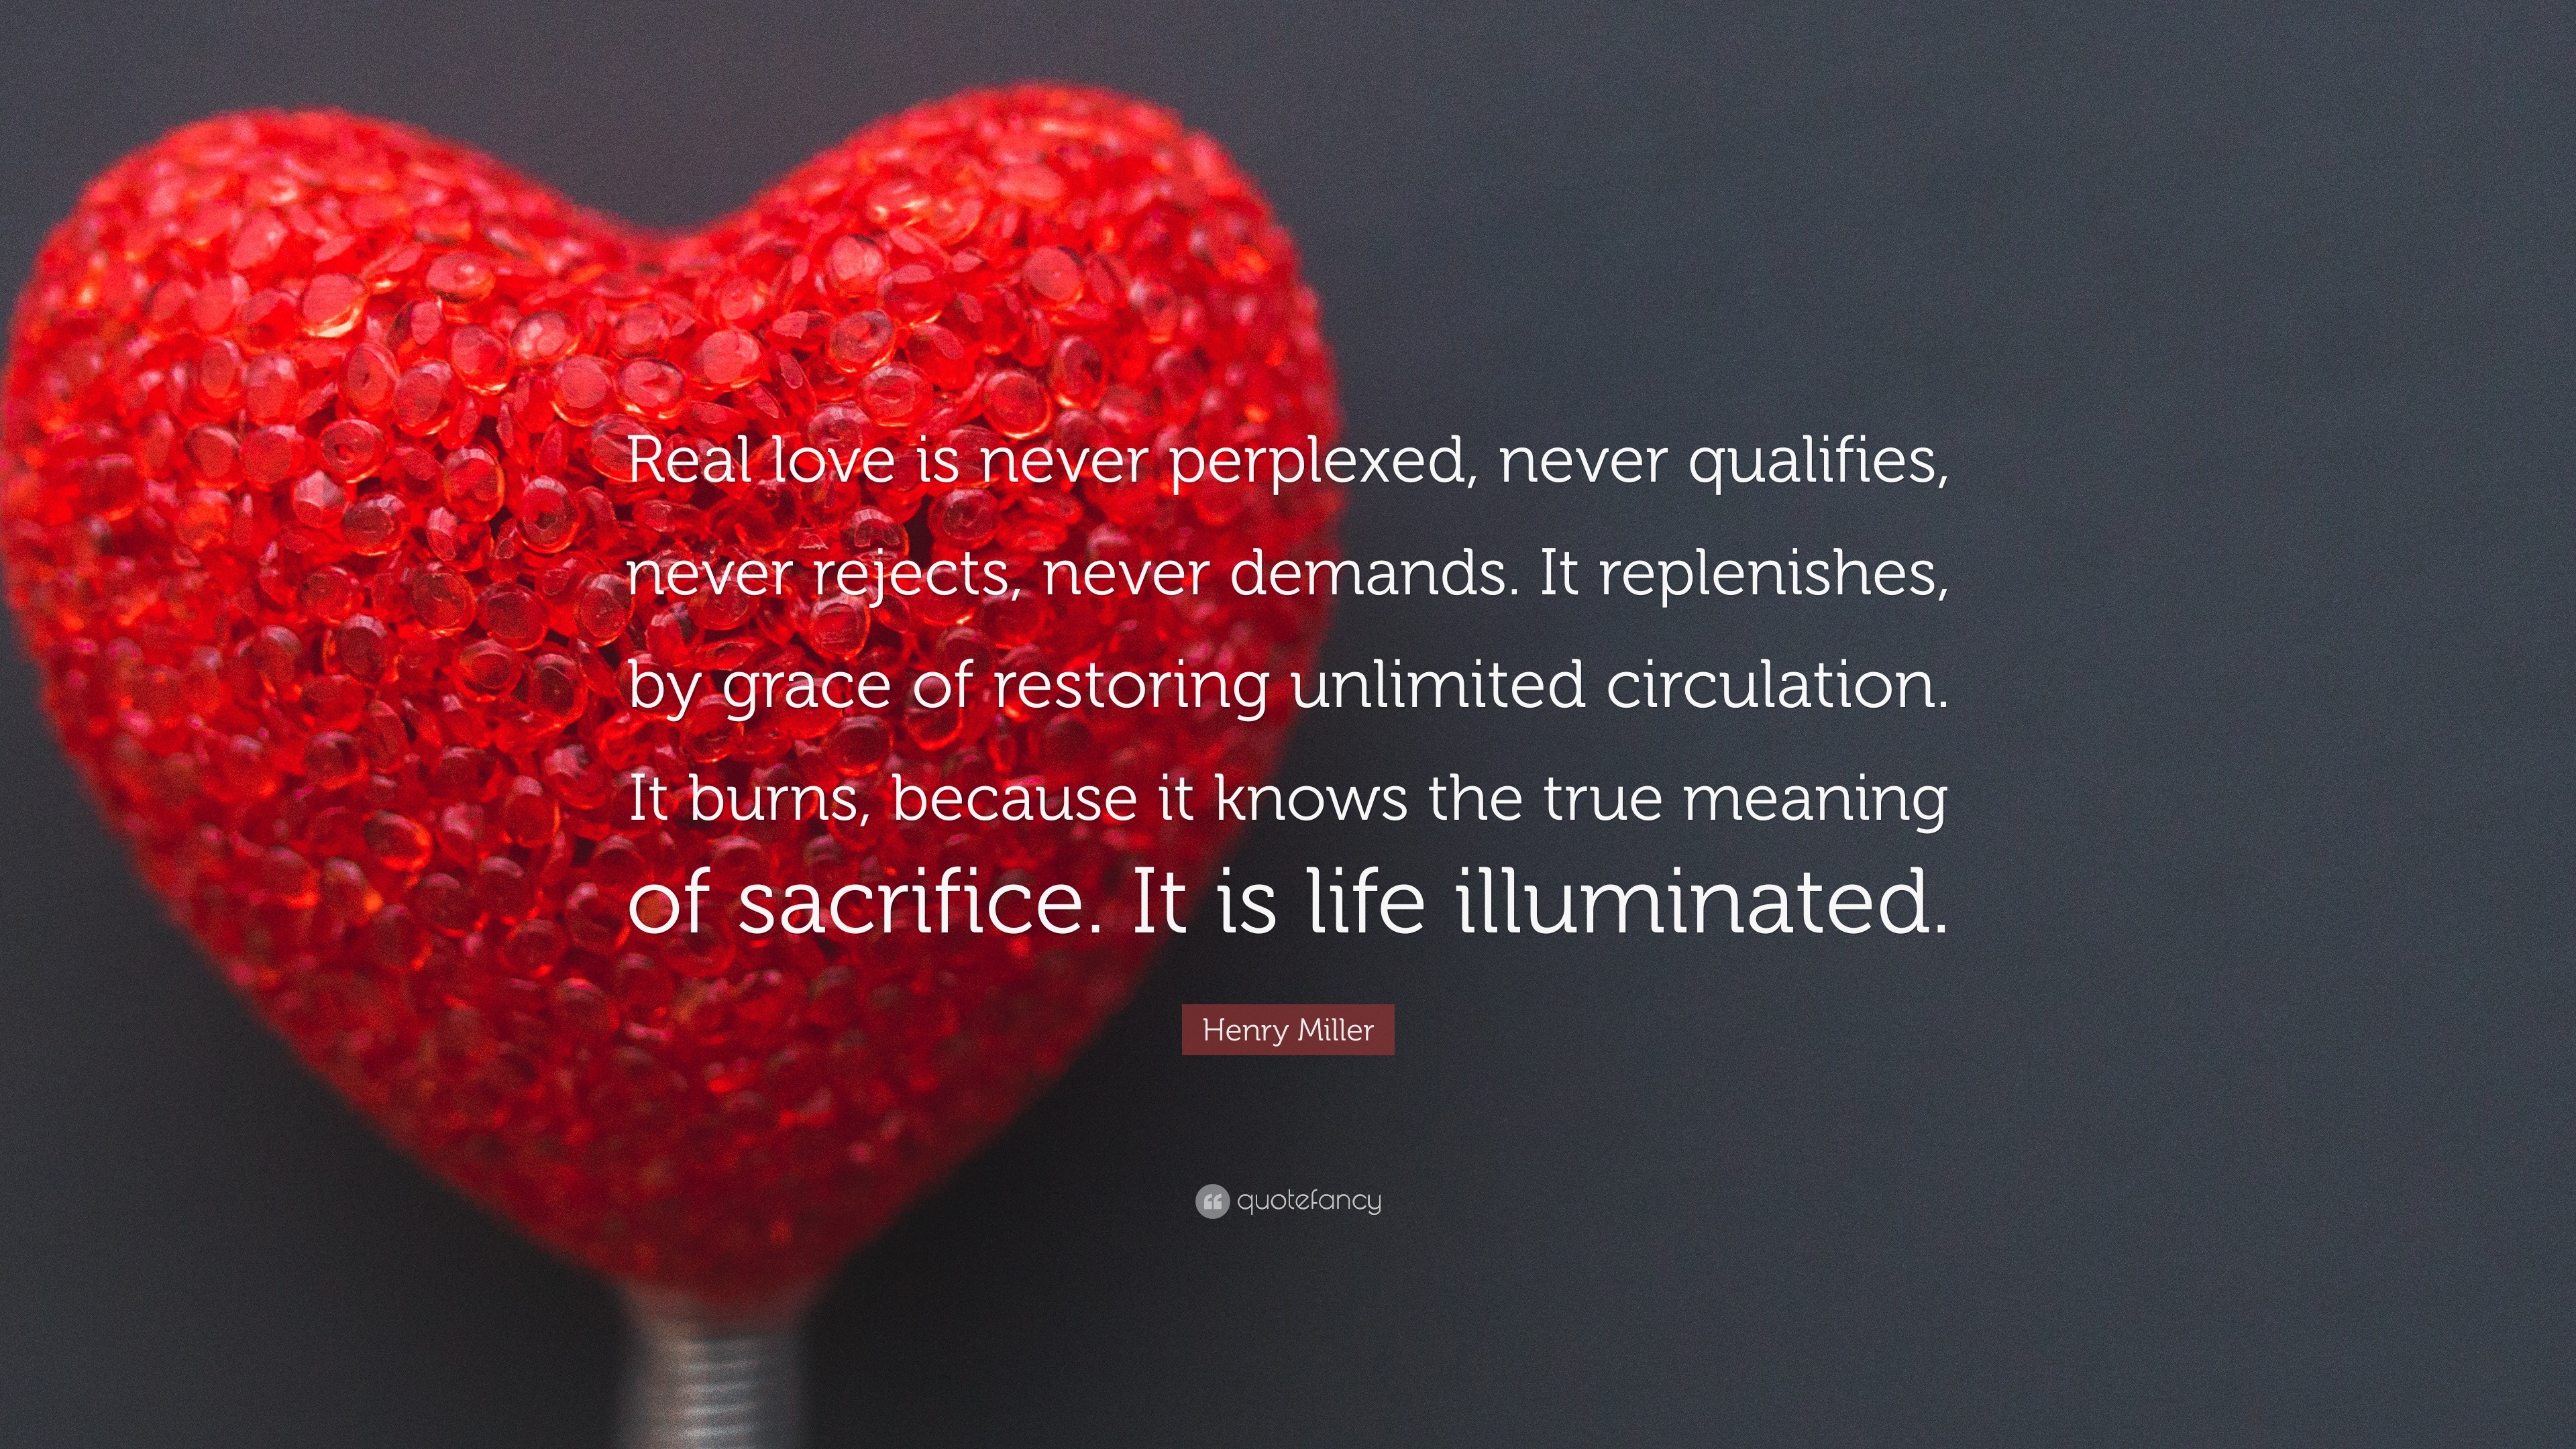 Henry Miller Quote “Real love is never perplexed never qualifies never rejects